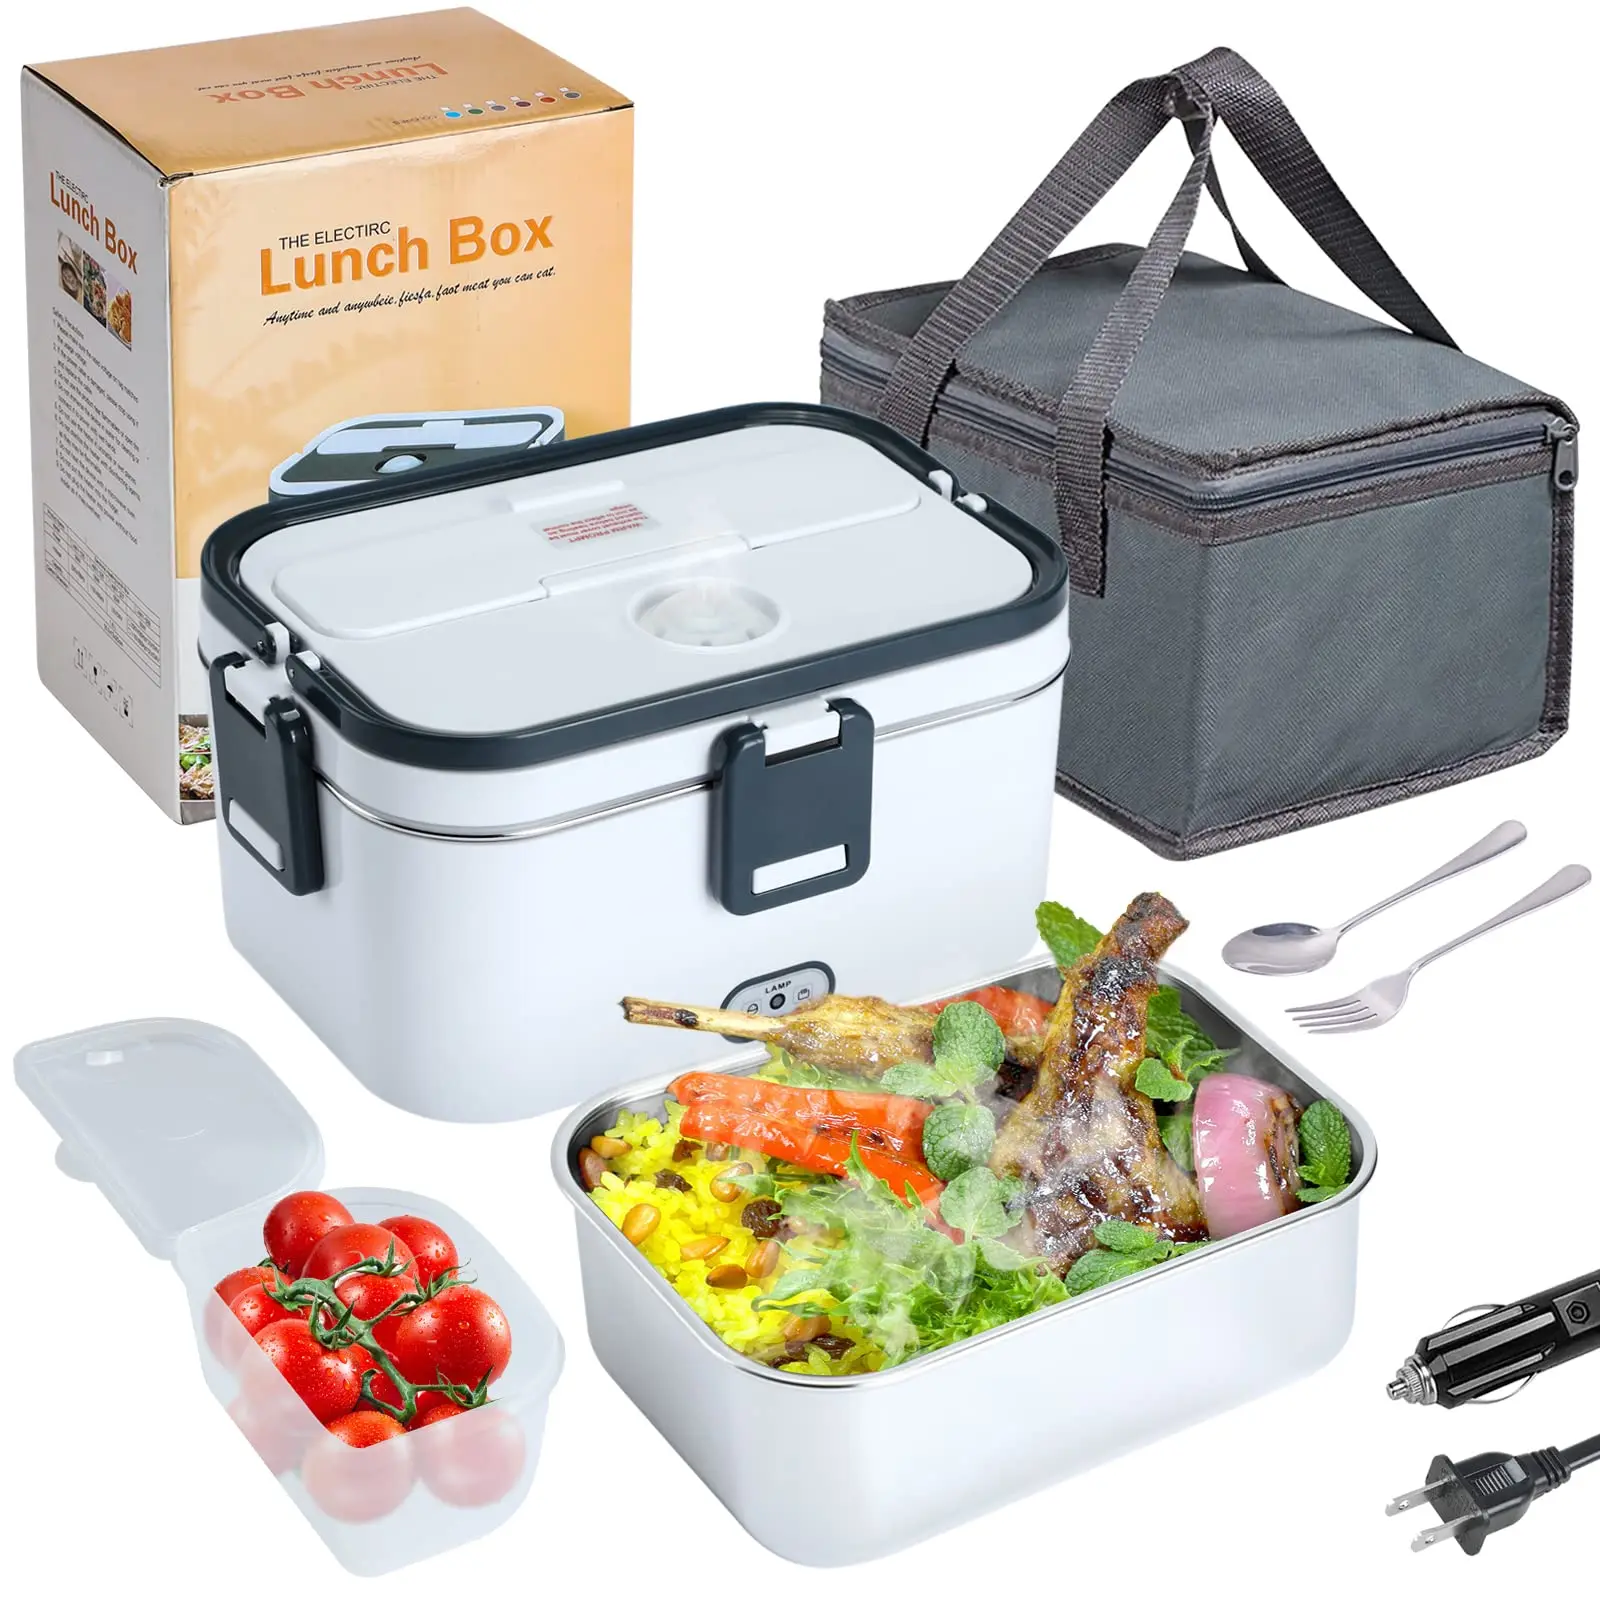 https://ae01.alicdn.com/kf/Sa16e00a5f7274c5ea4caeb7513e7fa596/1-8L-Electric-Lunch-Box-Food-Heater-High-Power-60W-Luncheaze-2-in-1-Portable-Heated.jpg